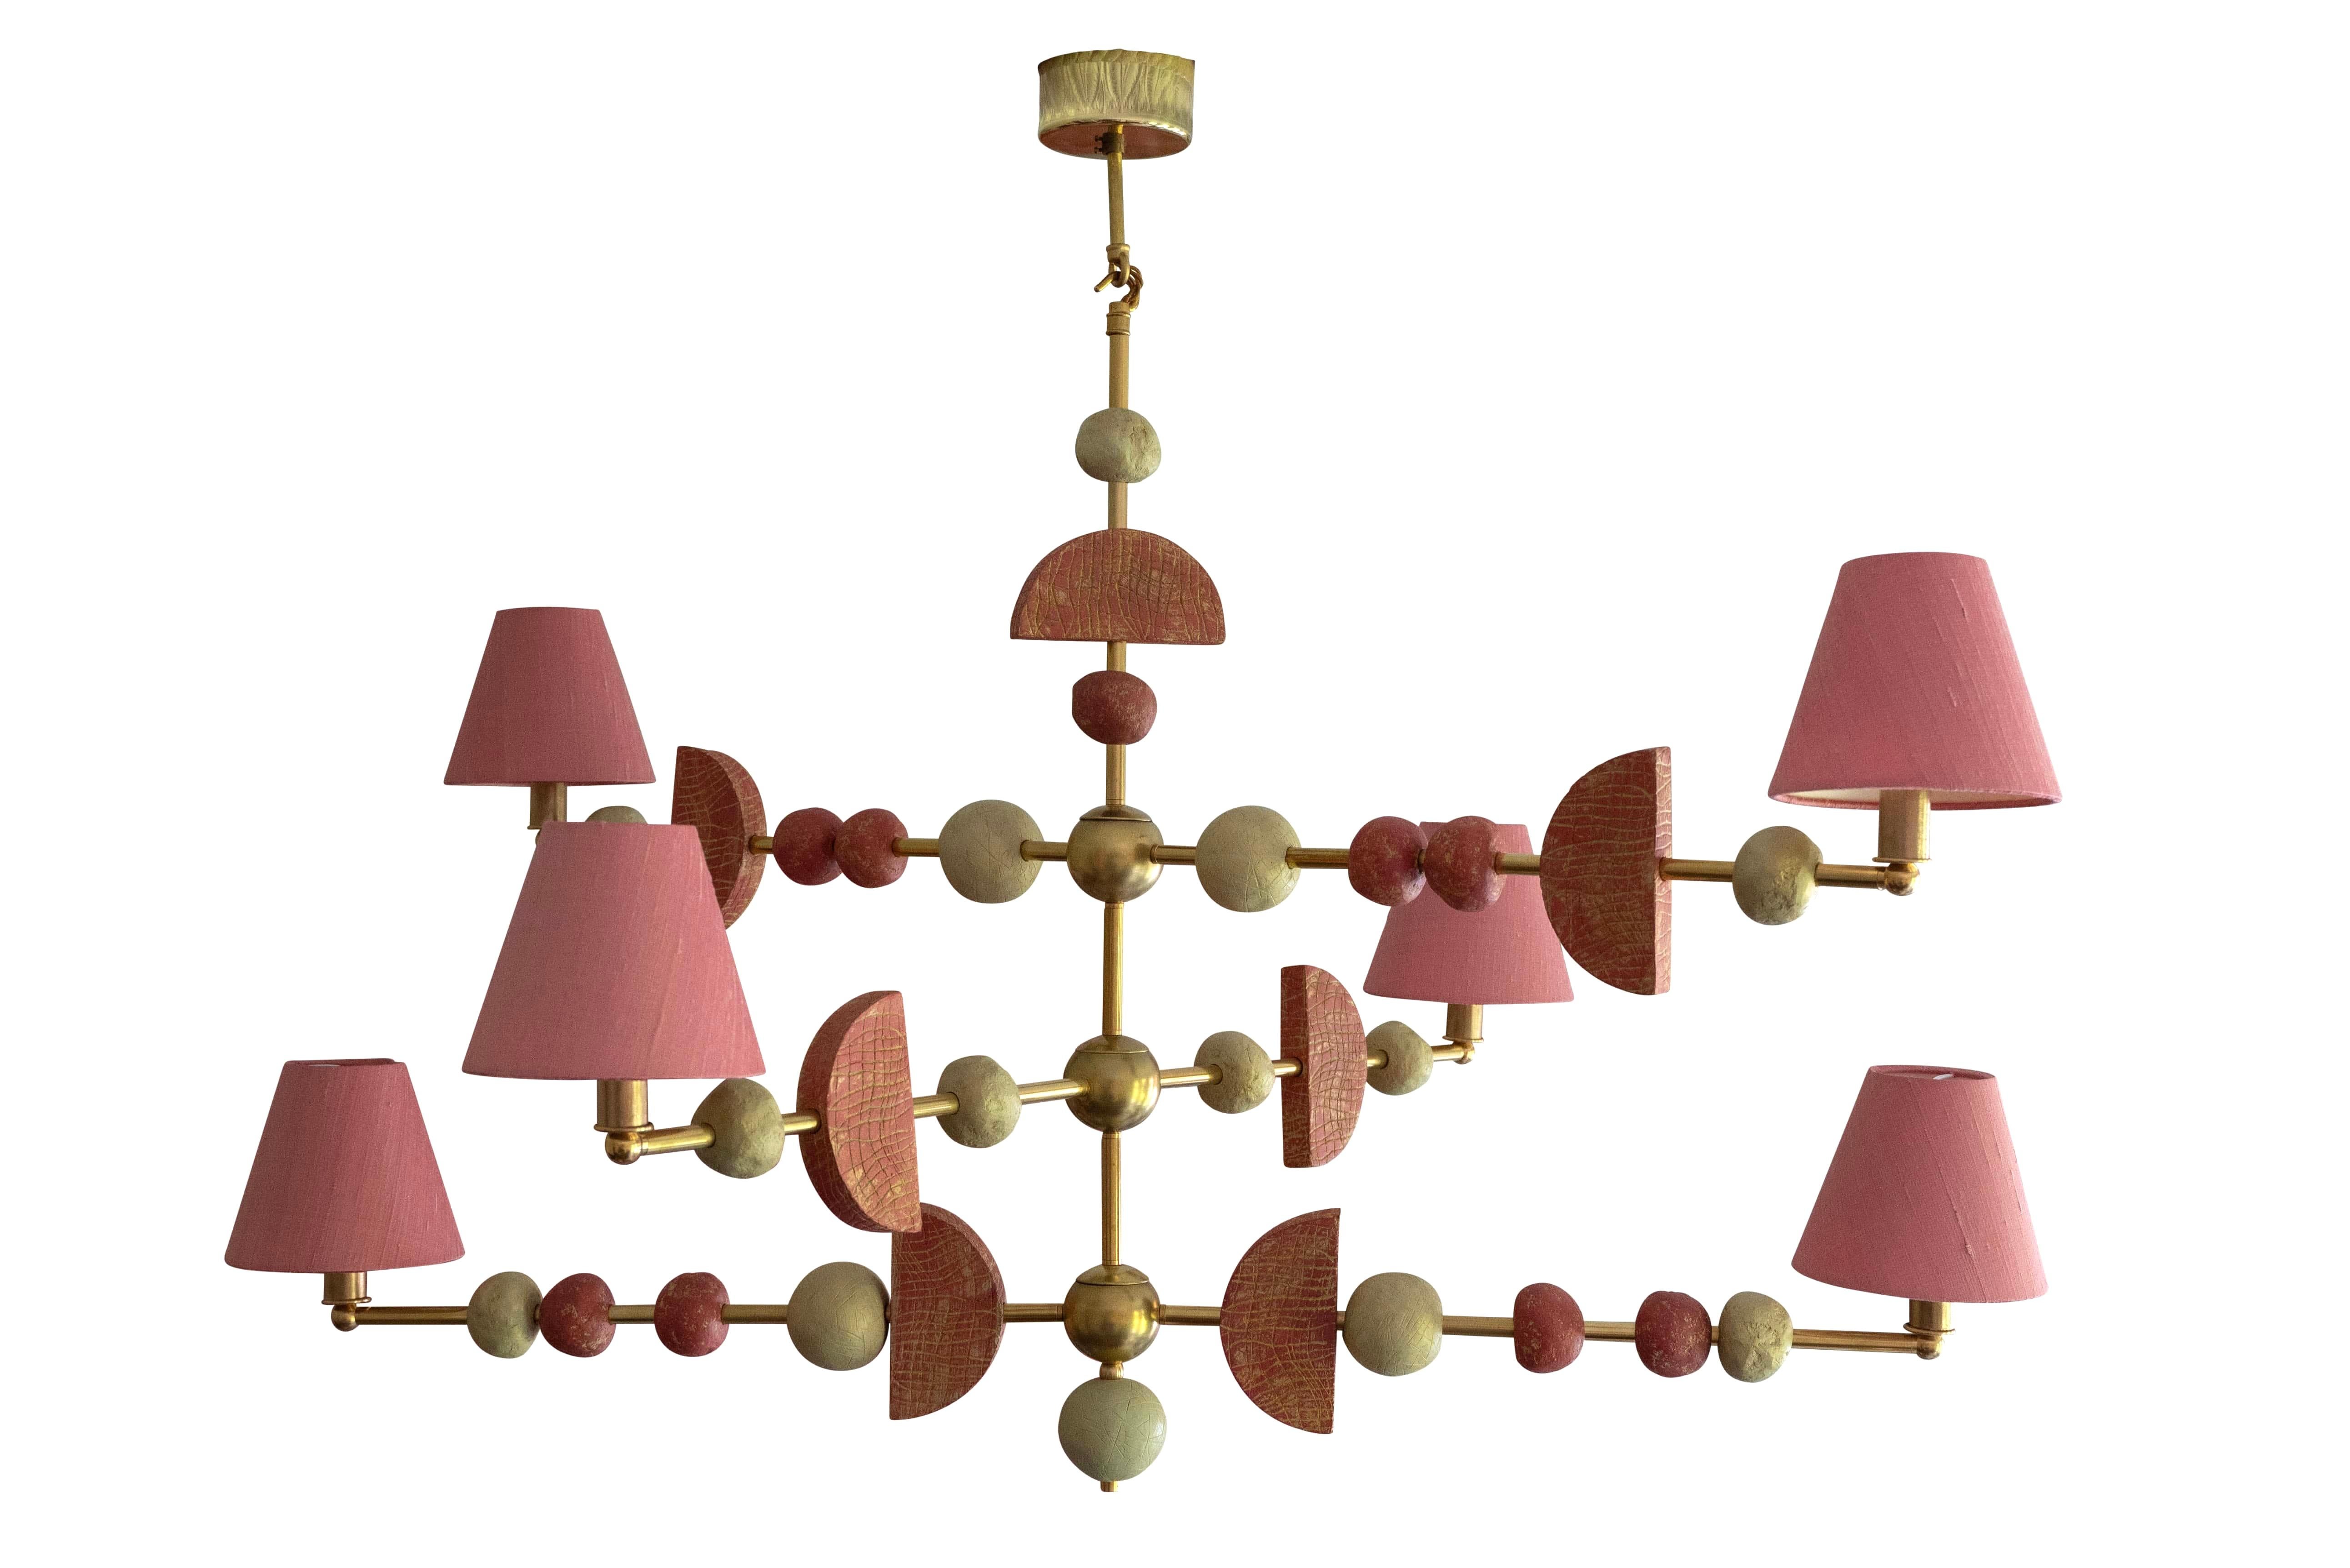 This contemporary three-tier chandelier by Margit Wittig features sculptural components with organic and subtle textures, all cast and treated with multiple layers of patina in her London studio. The contrast of a soft, dark blush-rose colour,